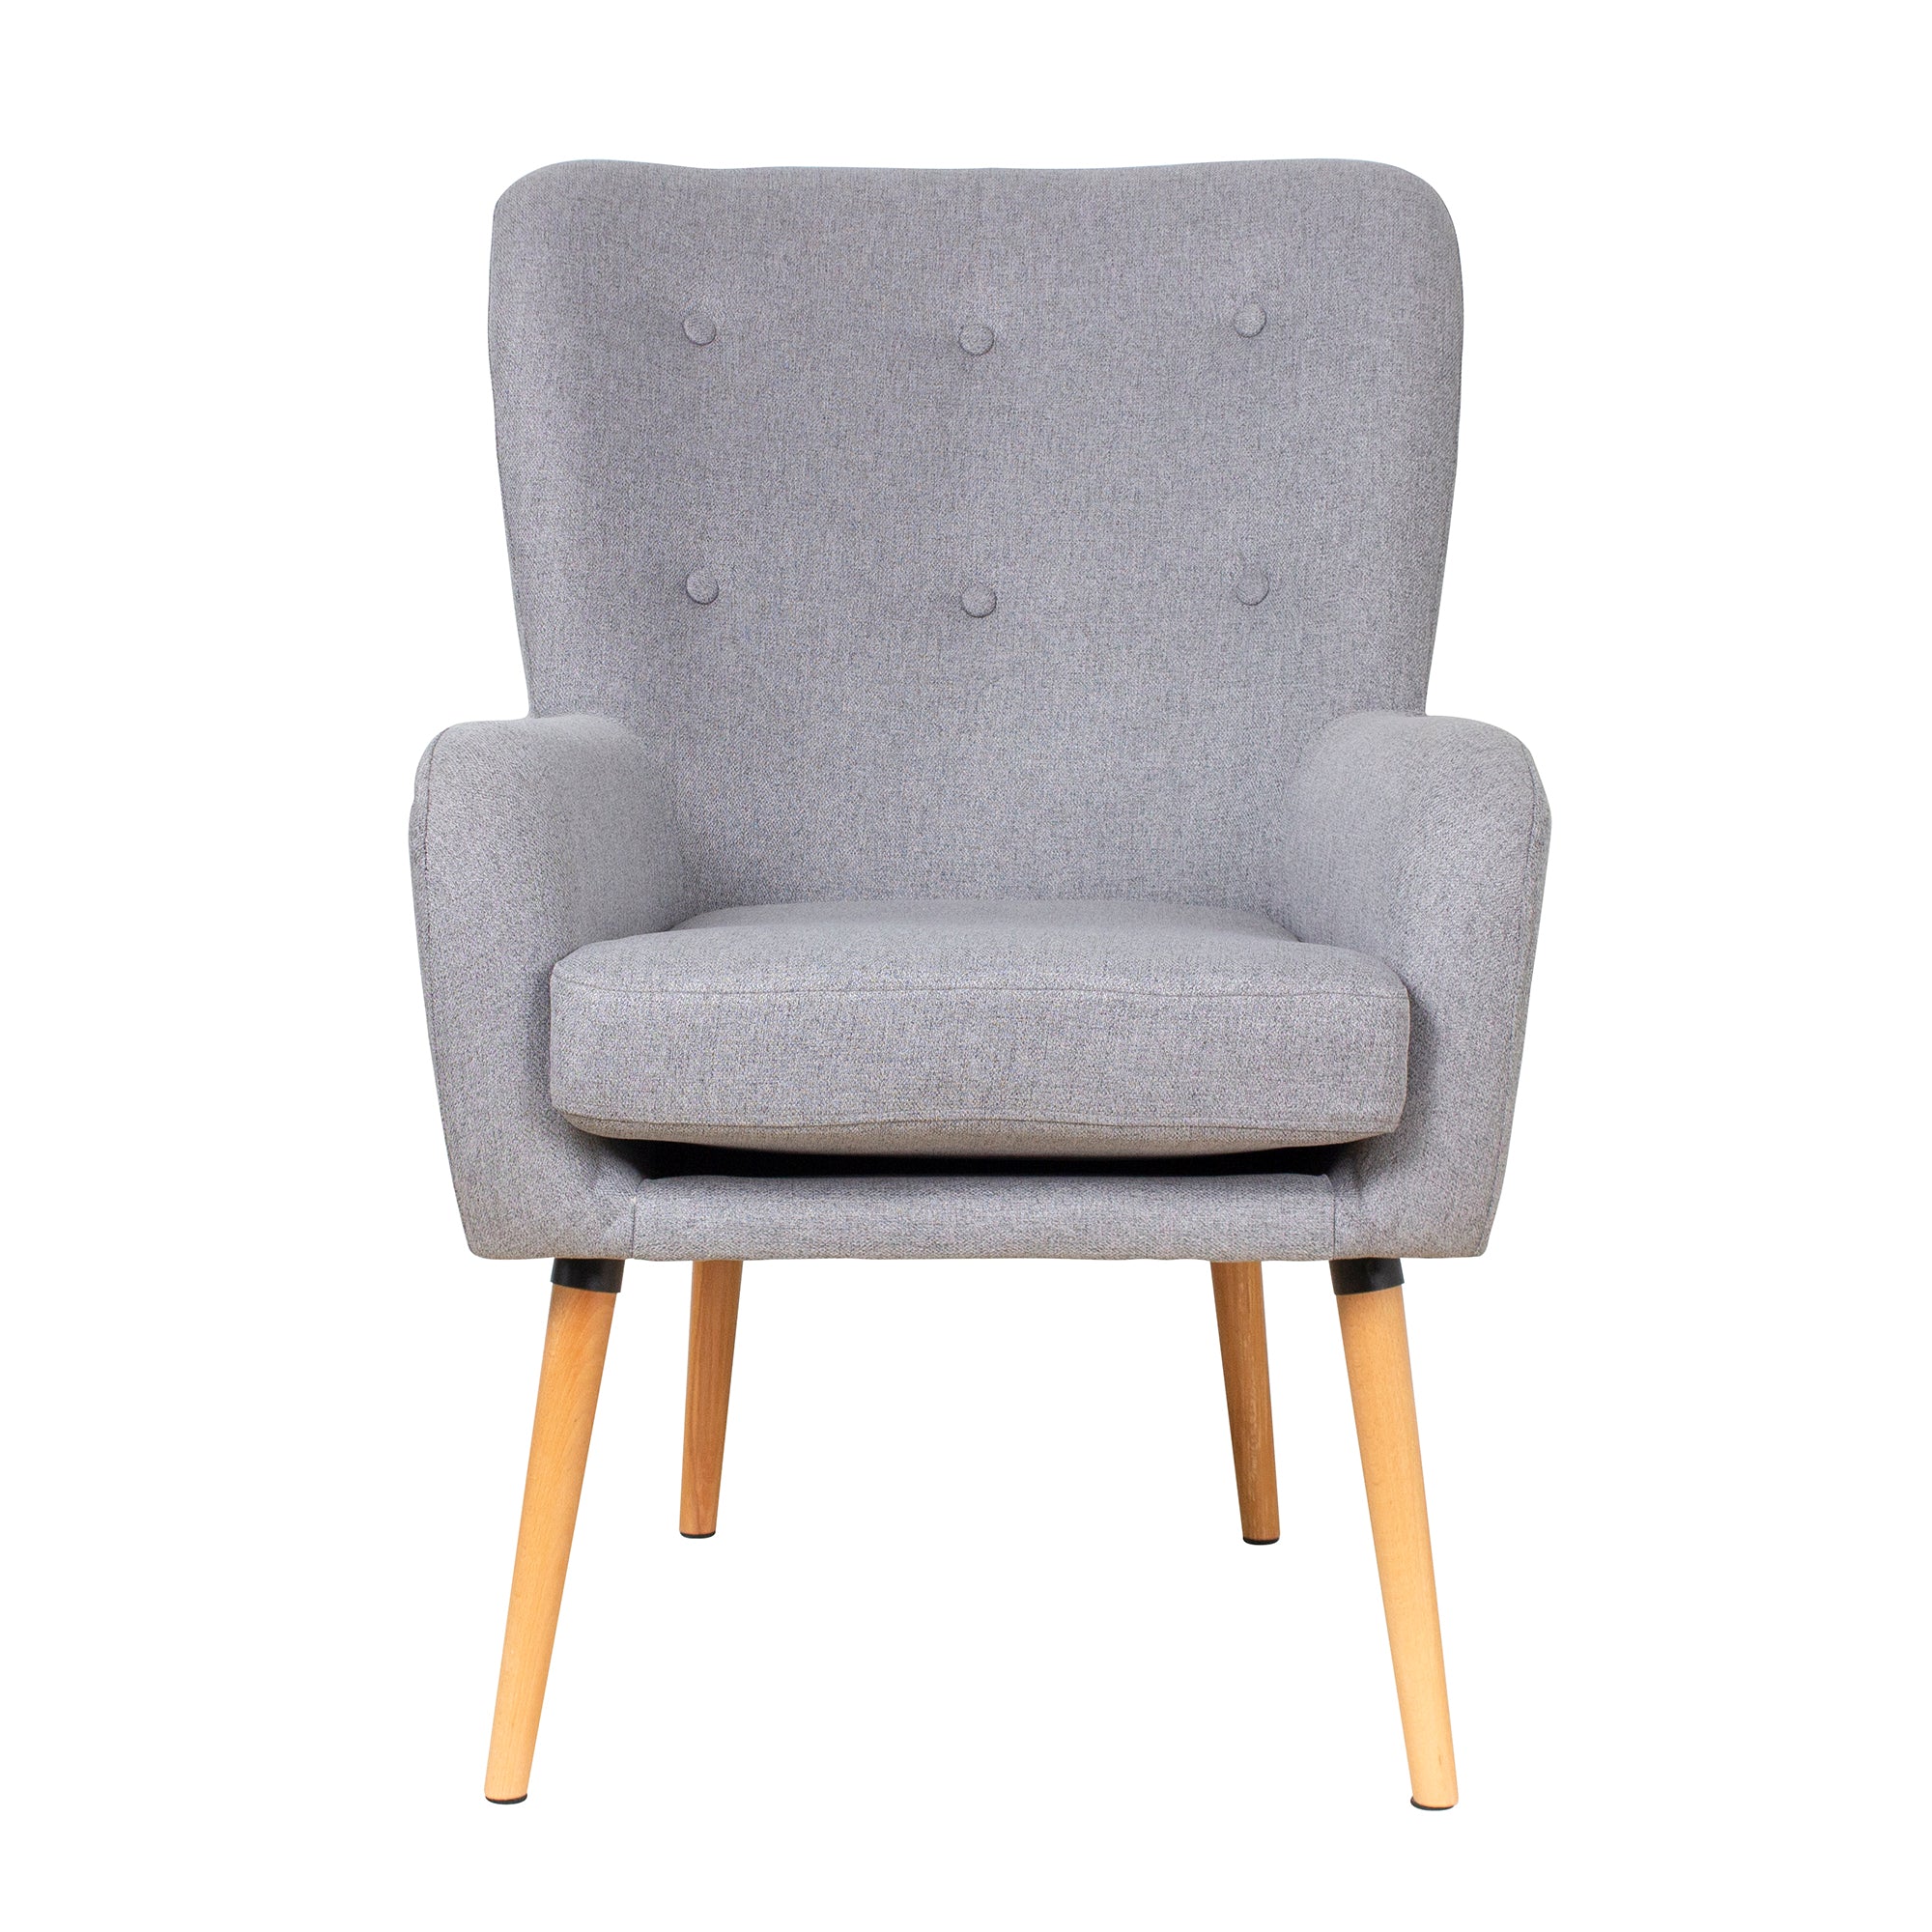 Contemporary Stylish Button-Tufted Upholstered Accent Armchair with Wood Legs-Boyel Living